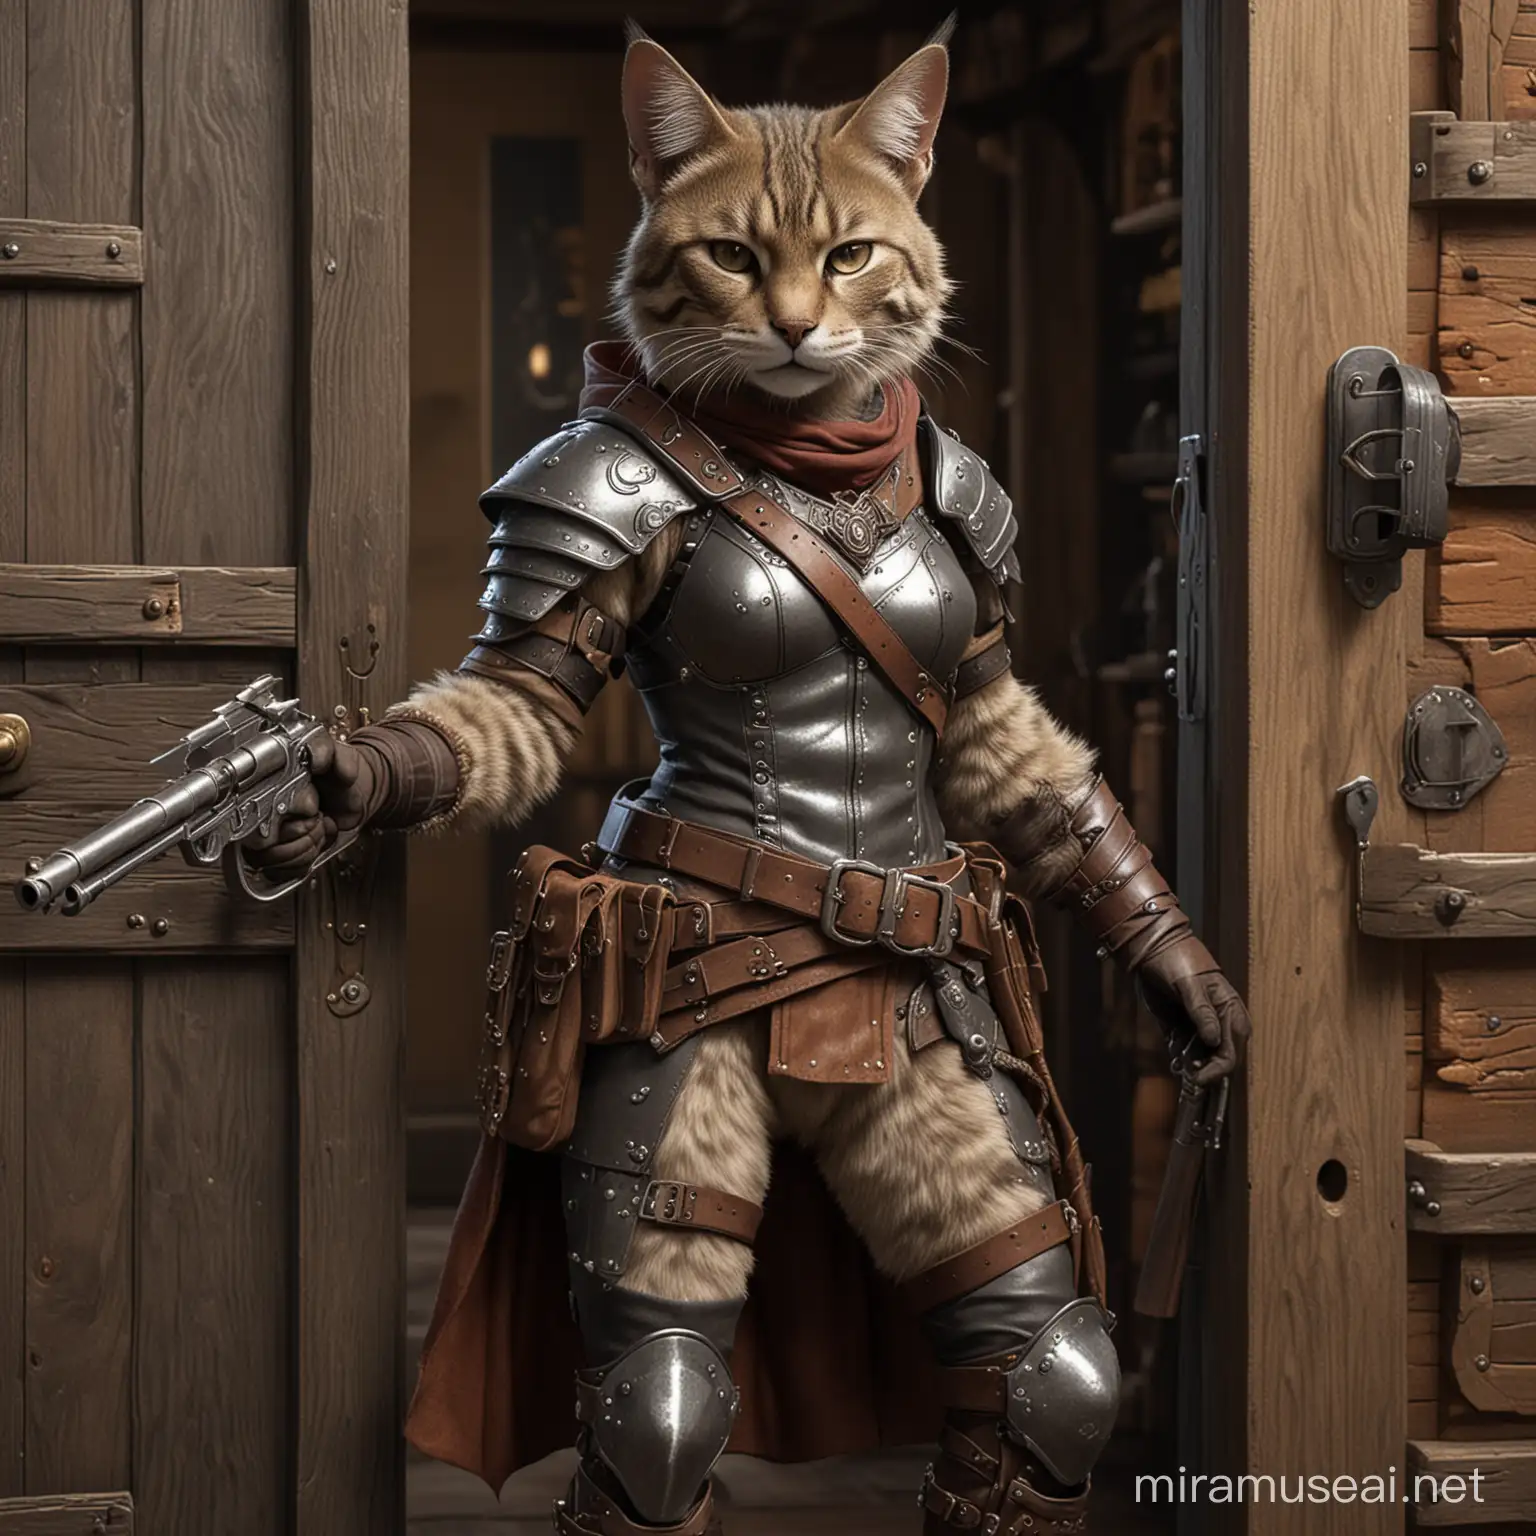 a tabaxi with grey fur and dark face opens the tavern door. She is wearing leather armor and has two revolvers holstered in her belt
